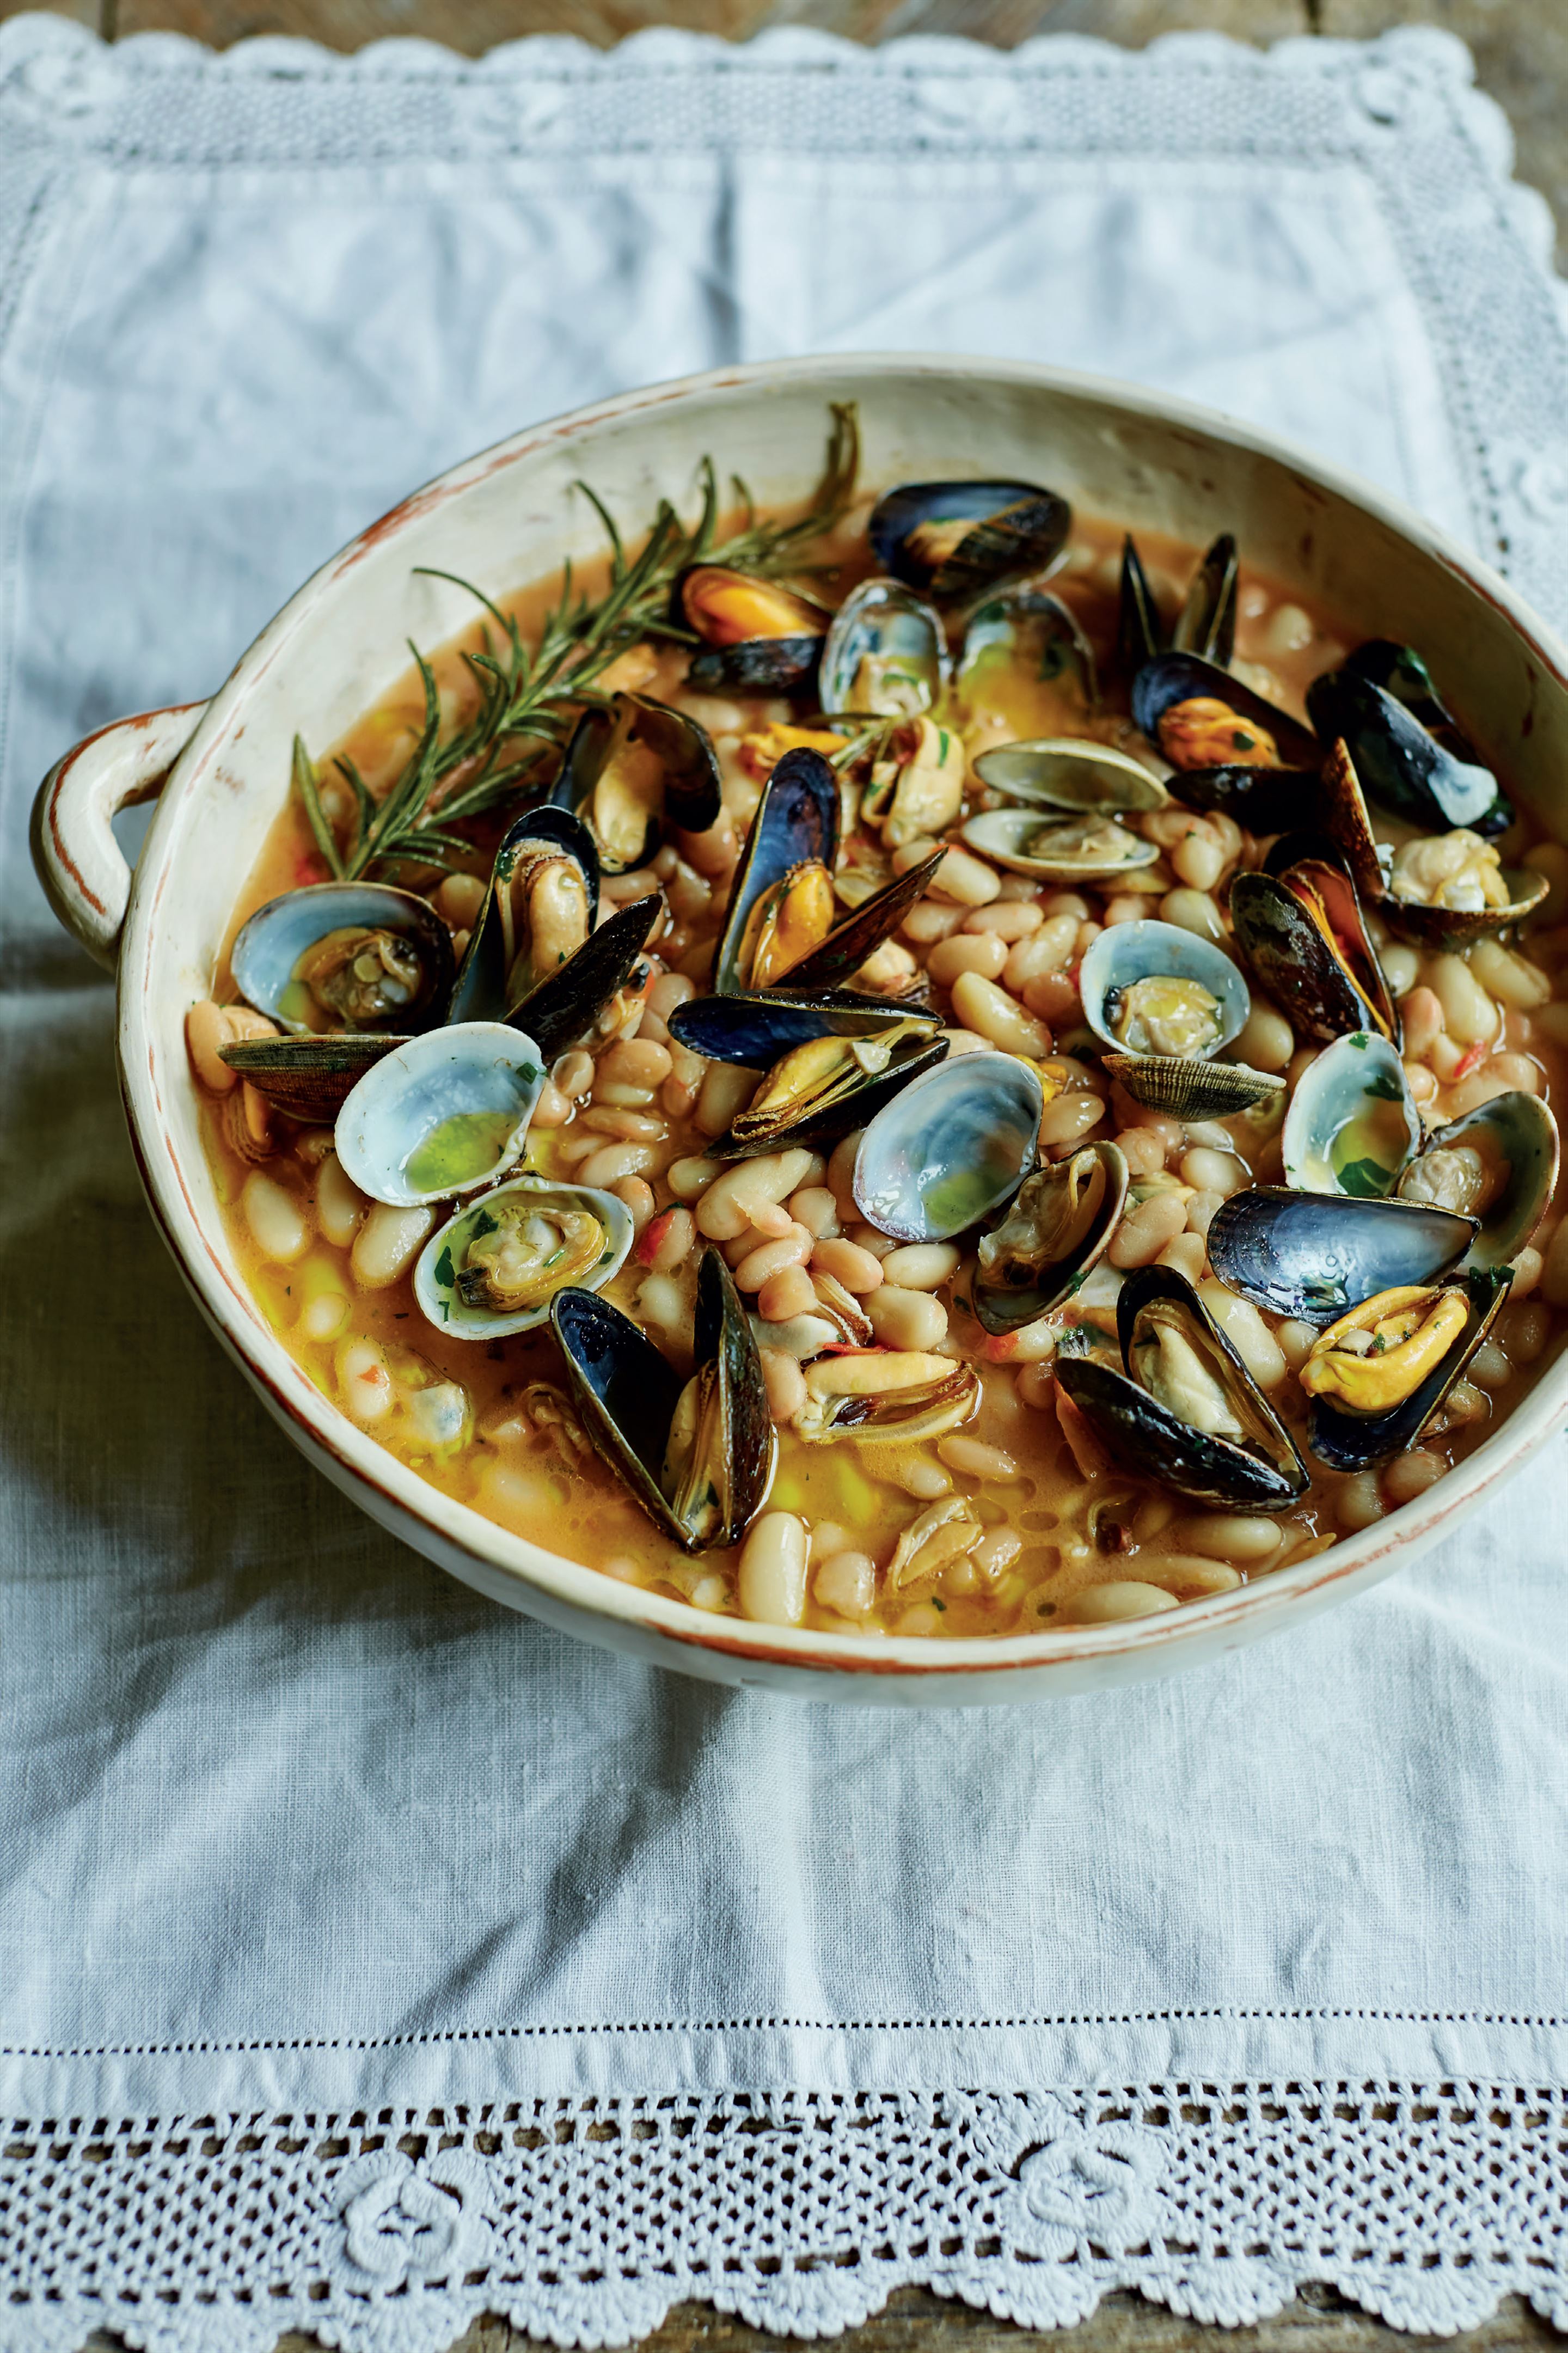 Cannellini beans with mussels and clams